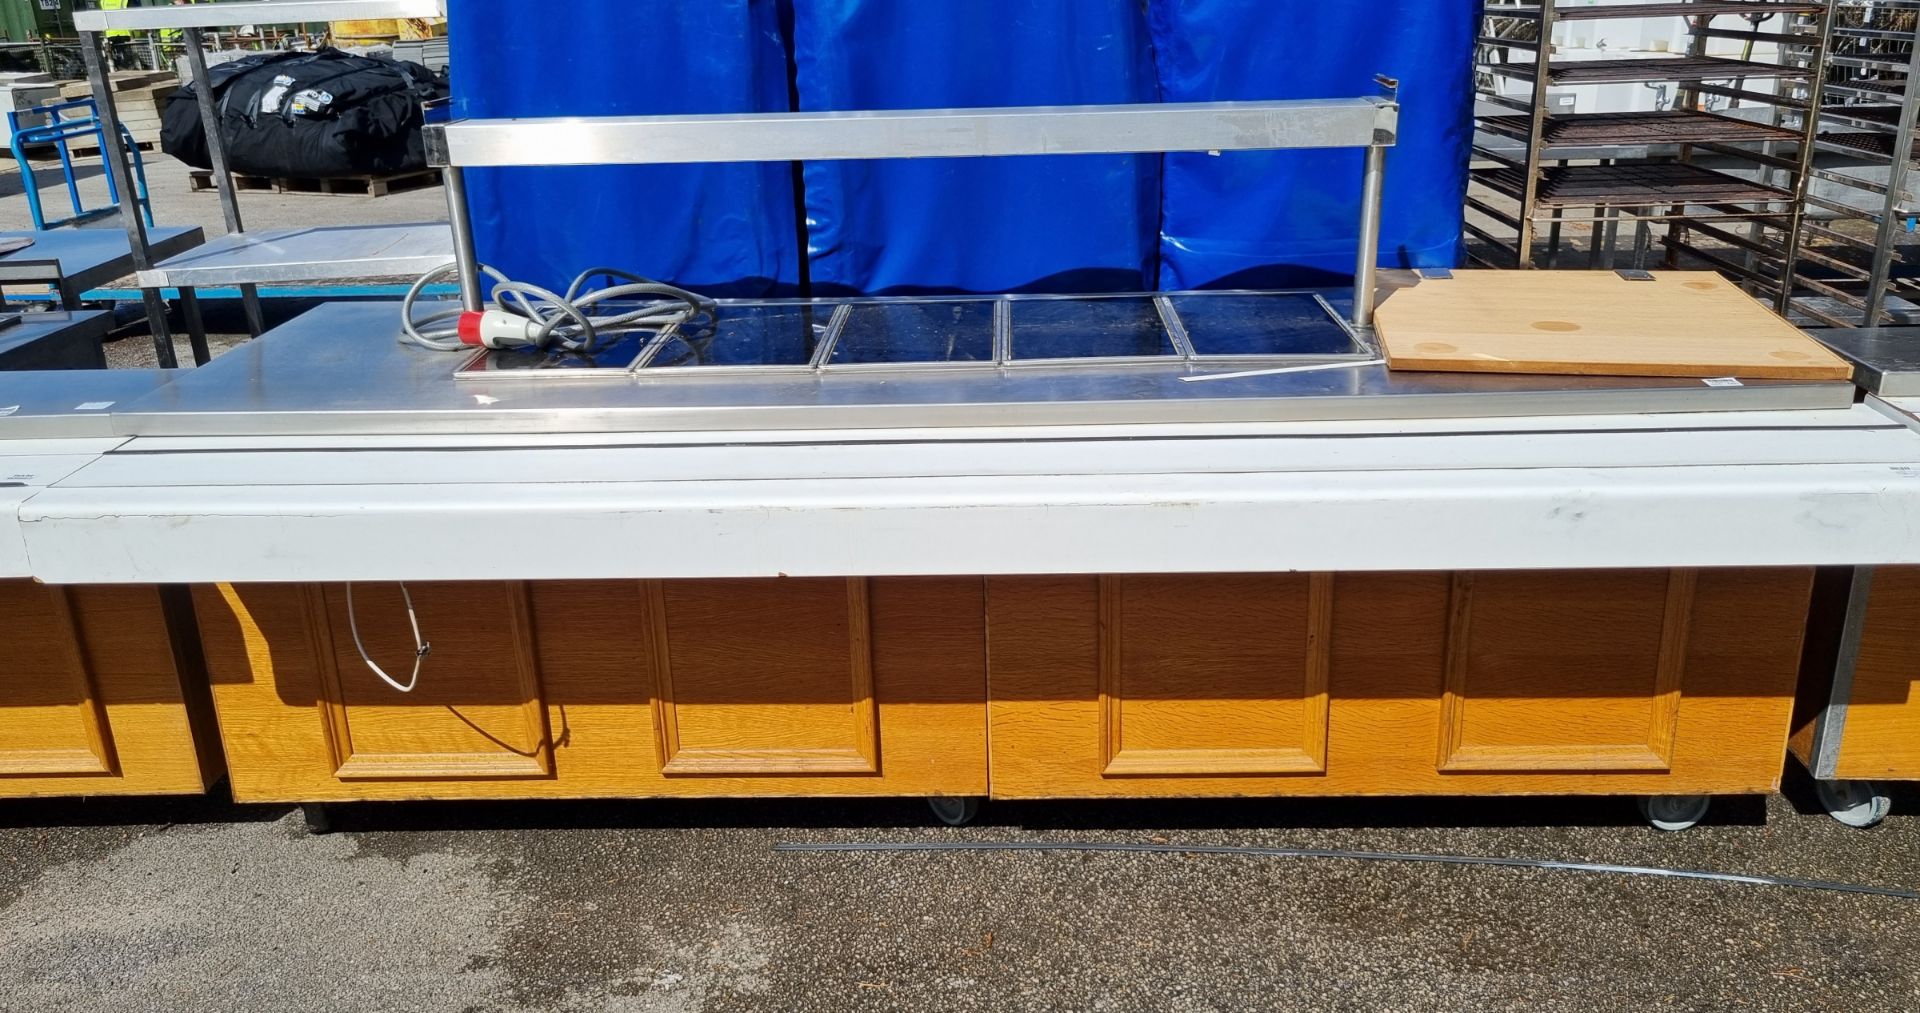 Portable hot cupboard with bain marie unit and tray slide - W 2860 x D 1160 x H 1370 mm - Image 5 of 5